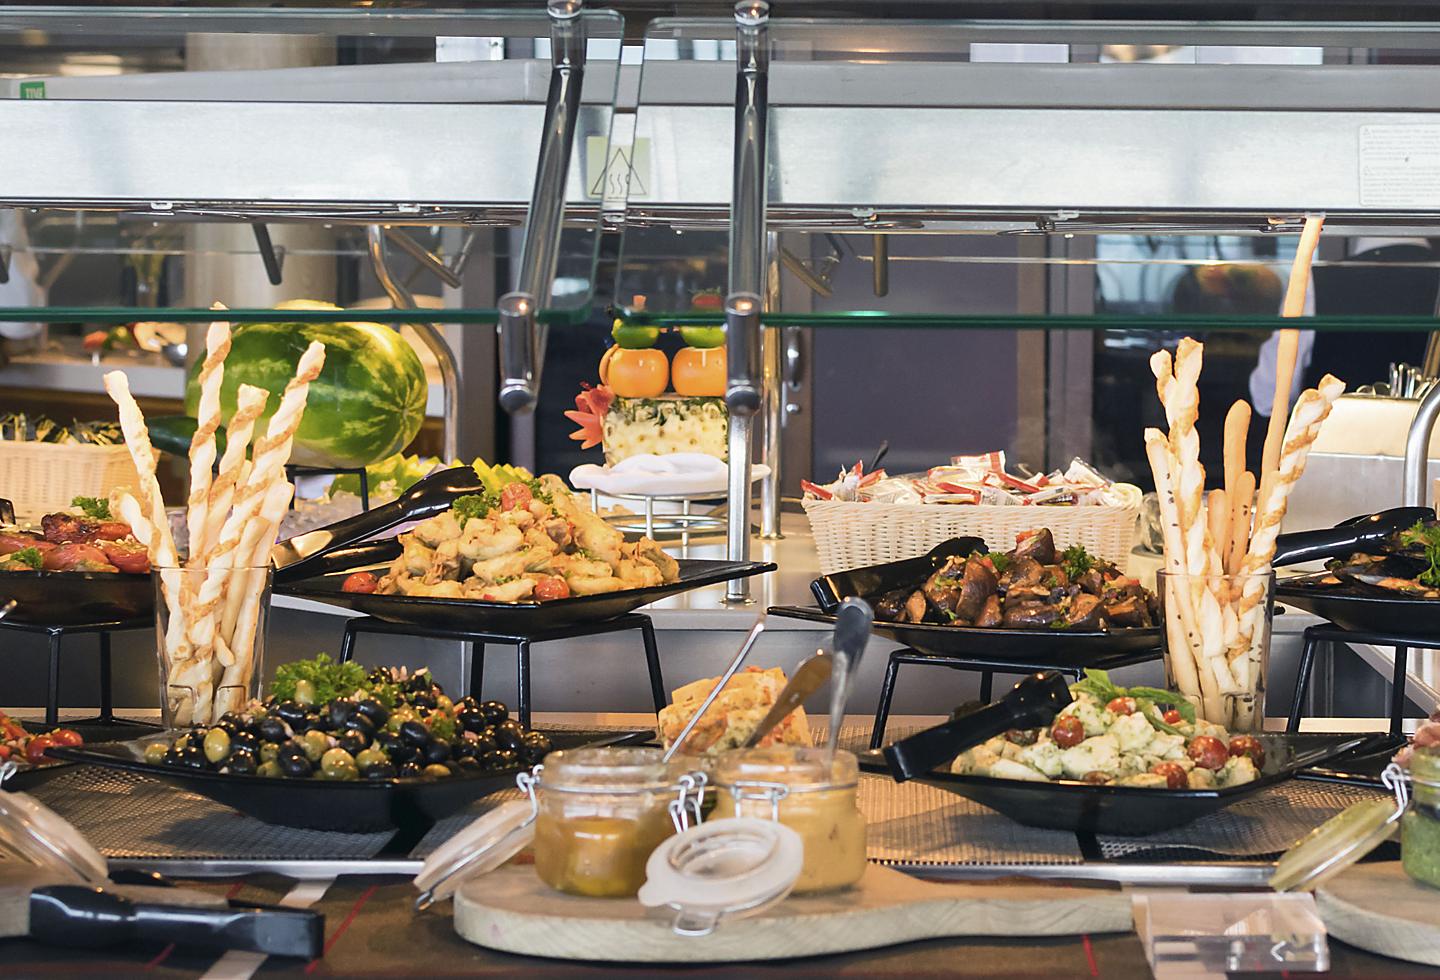 Royal Caribbean will not have a dinner buffet option on first cruises